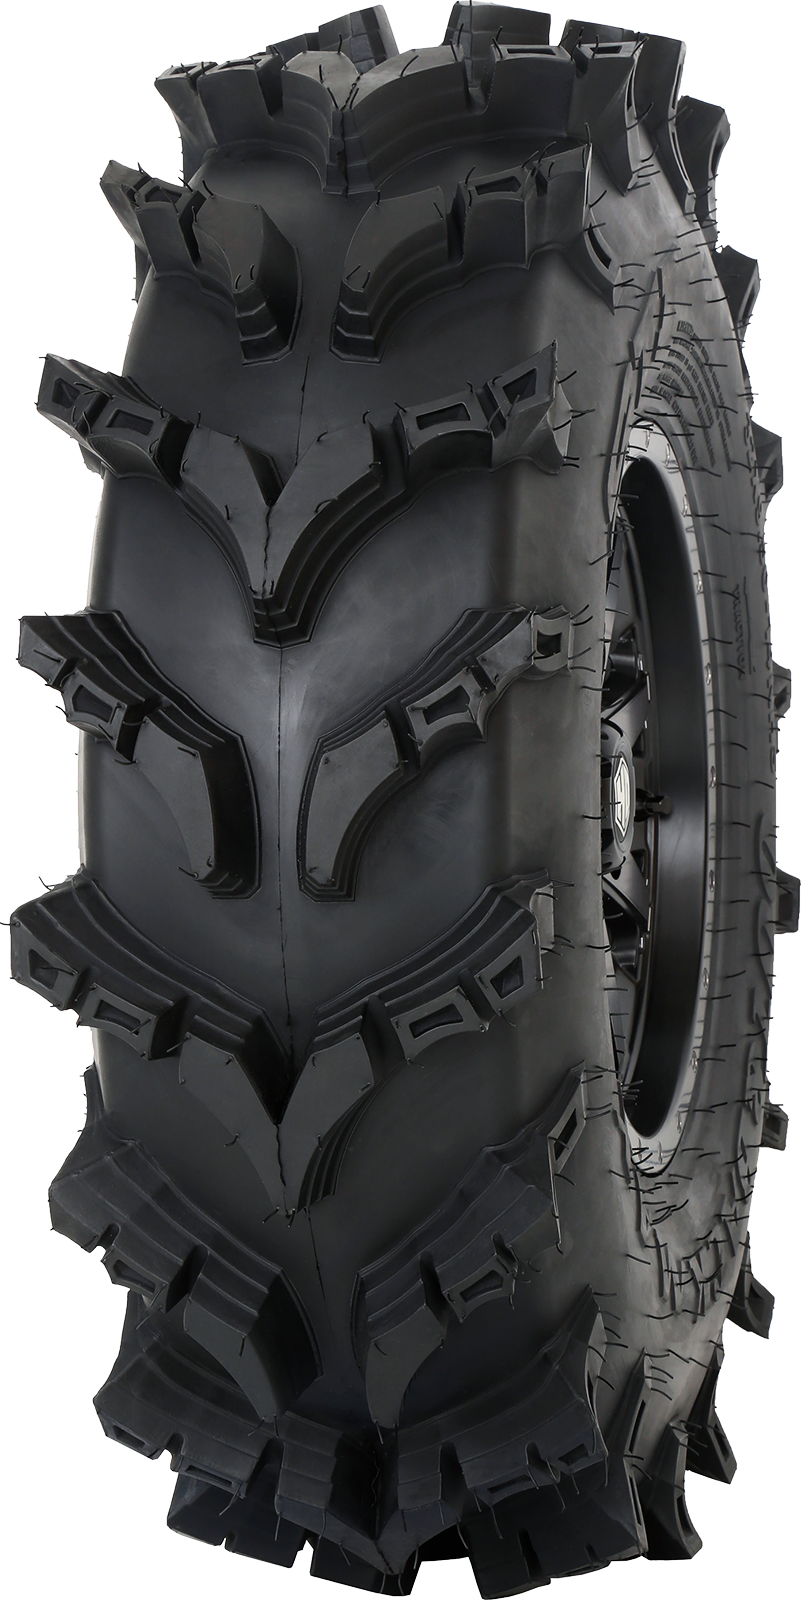 STI TIRE & WHEEL Tire - Out & Back Max - Front/Rear - 28x9.5-14 - 8 Ply 001-1324